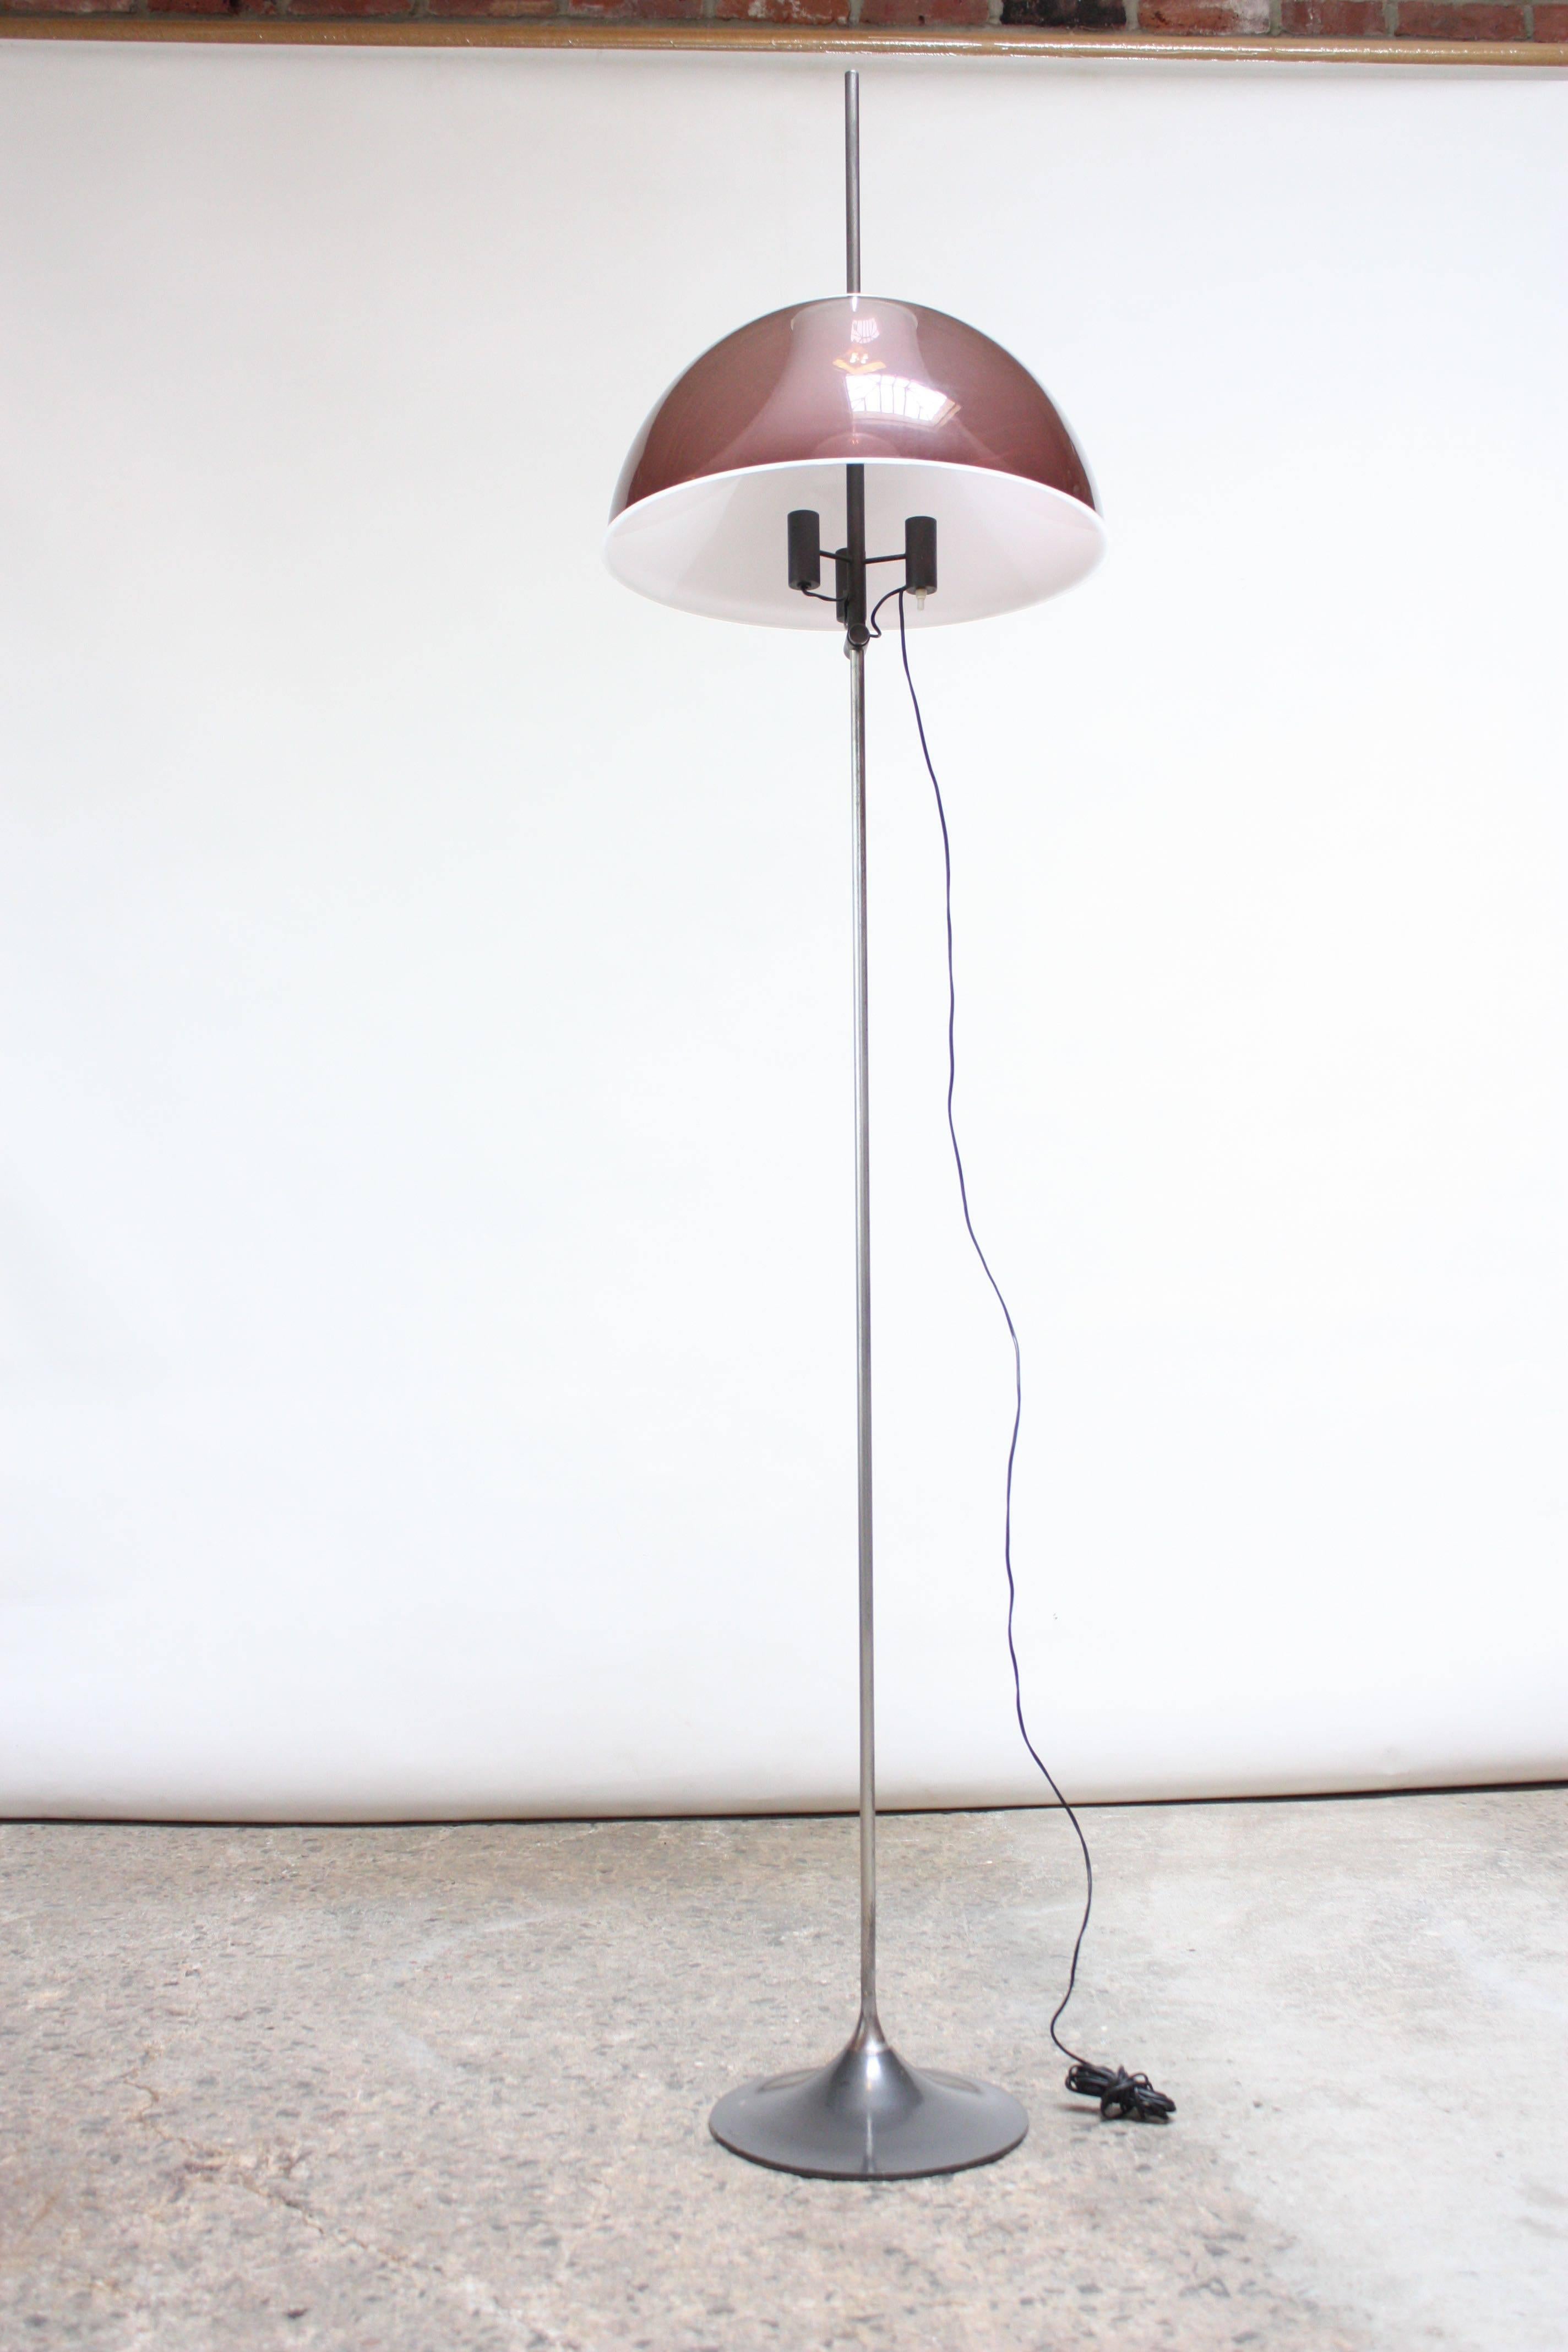 Italian floor lamp composed of dual shade (interior white and exterior light plum acrylic shade) mounted to a nickel plated steel rod on an enameled steel base. 
Shade height adjustability via a 'push-button' mechanism, allowing the shade to be